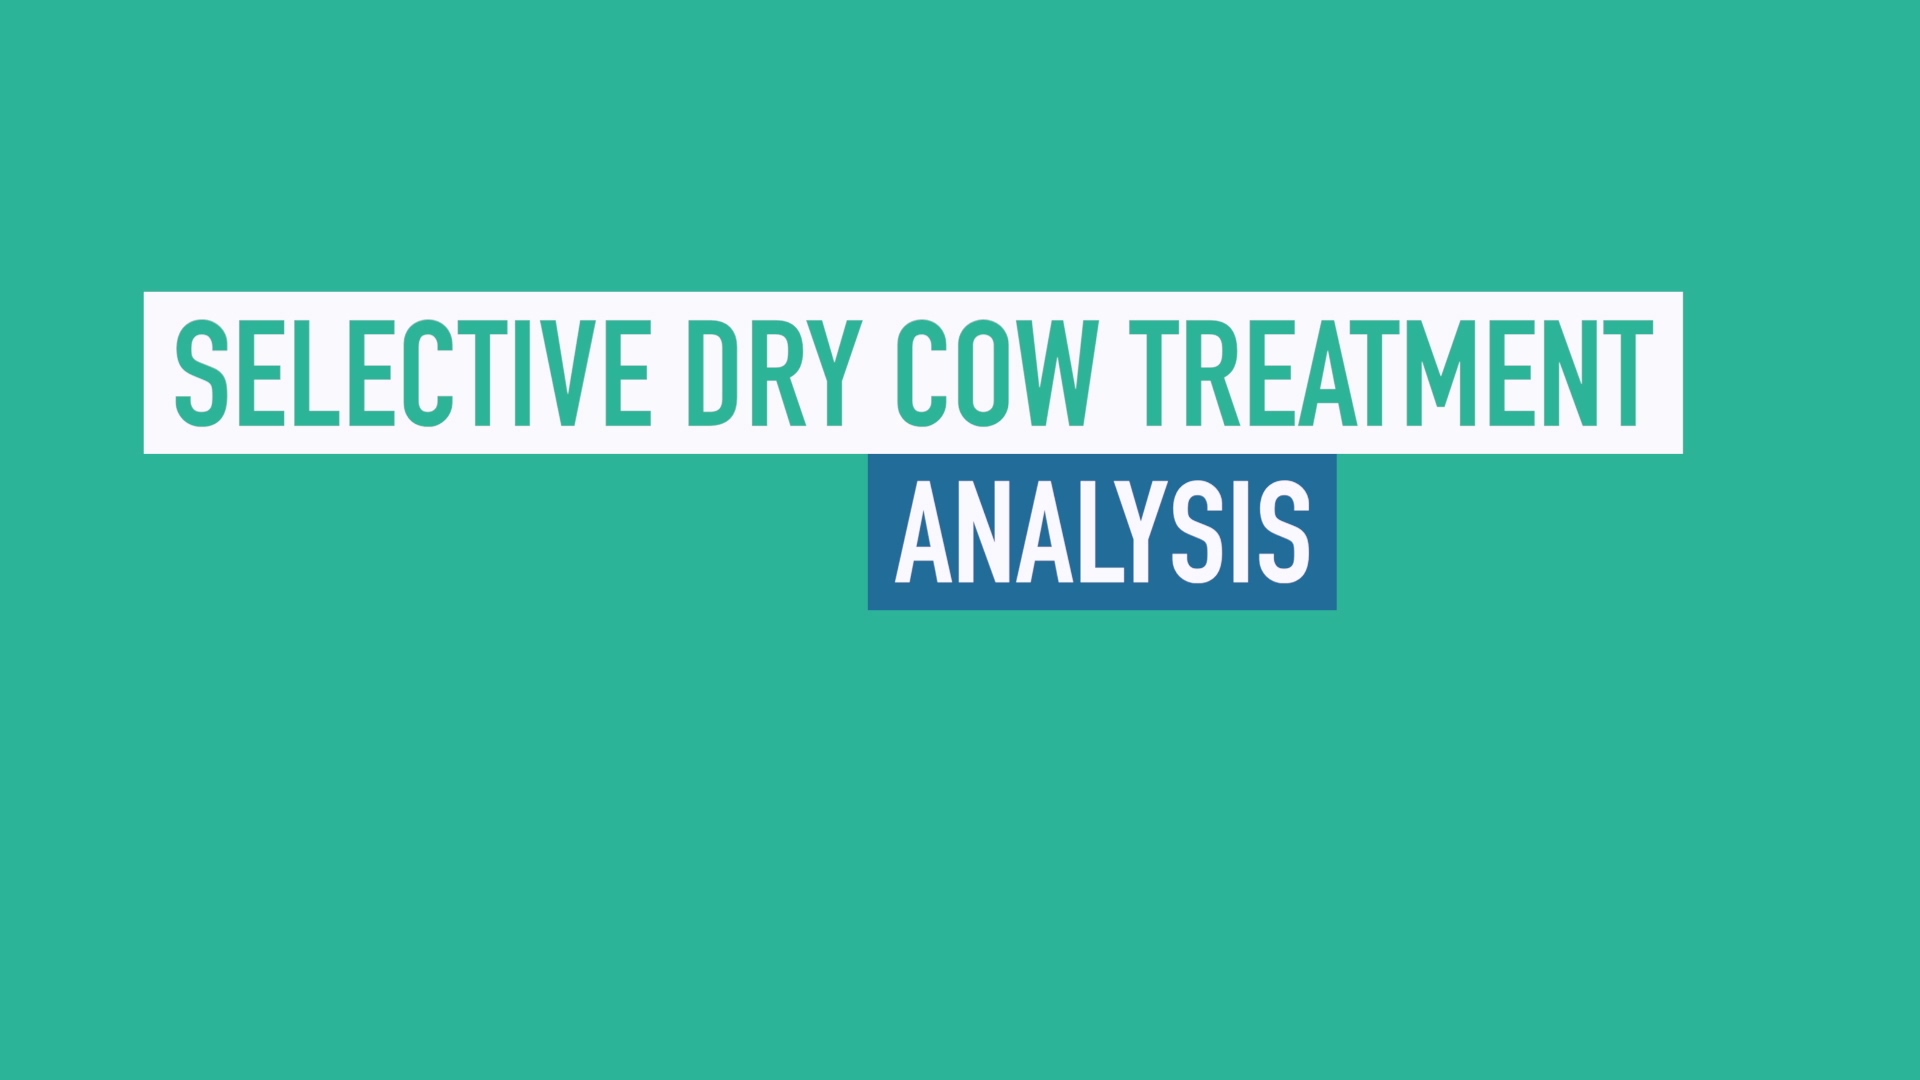 Selective Dry Cow Treatment Analysis